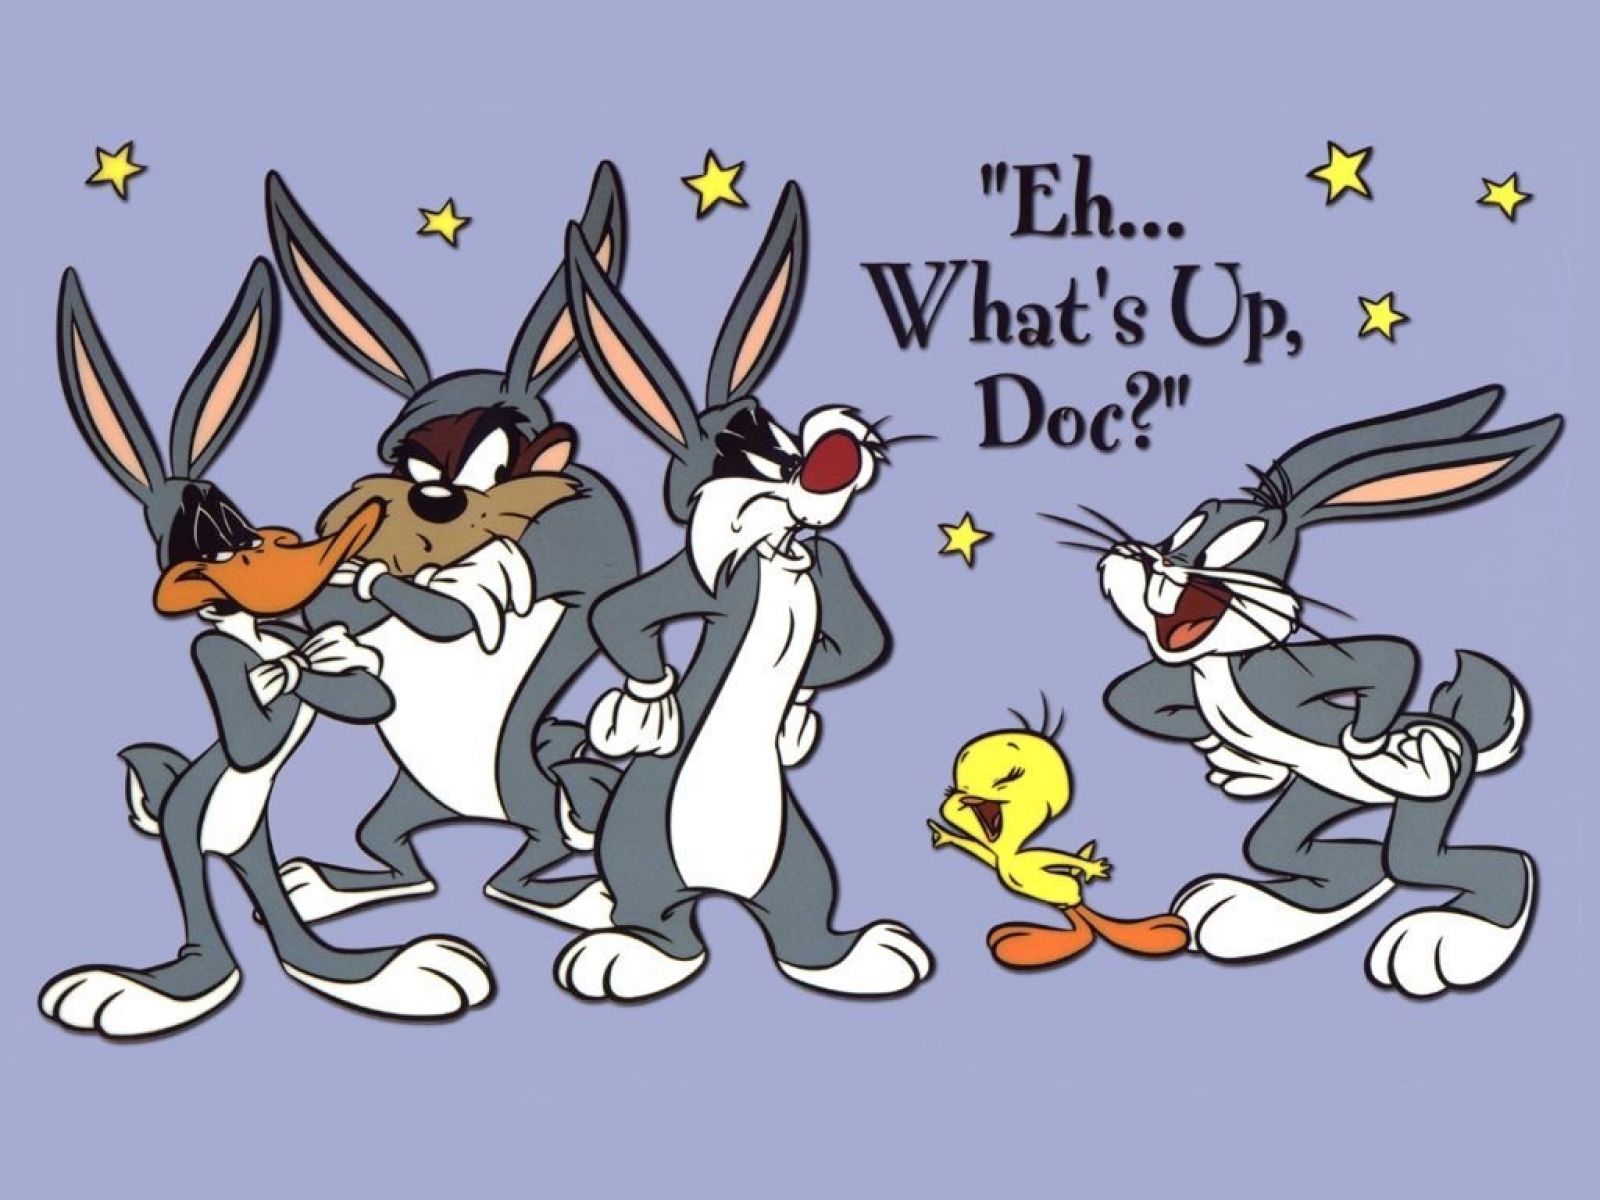 Bugs bunny and friends wallpaper Bugs bunny and friends wallpaper 1280x1024 - Bugs Bunny